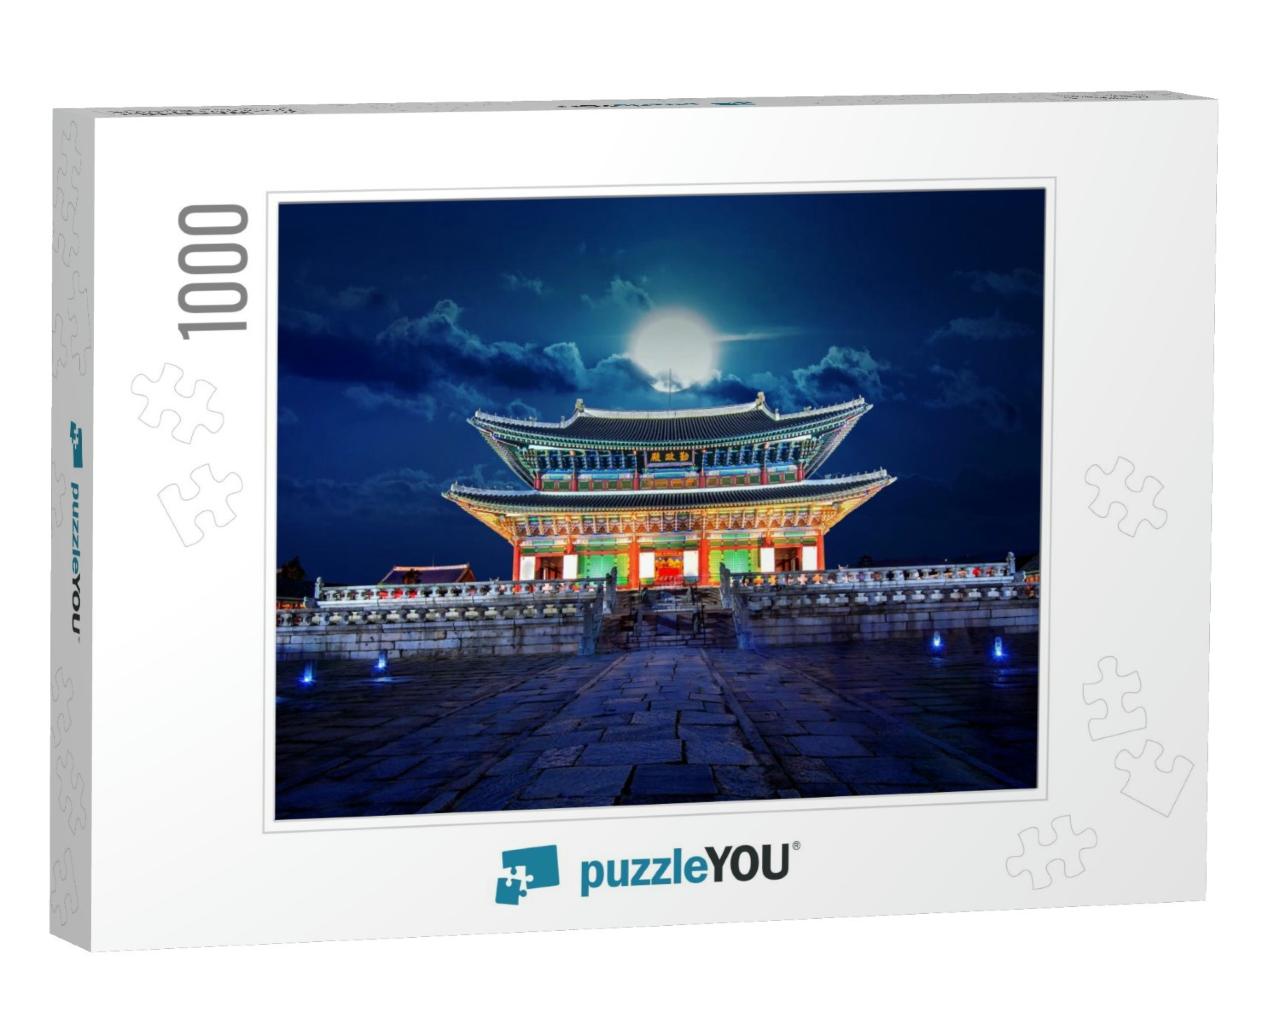 Gyeongbokgung Palace & Full Moon At Night in Seoul, South... Jigsaw Puzzle with 1000 pieces